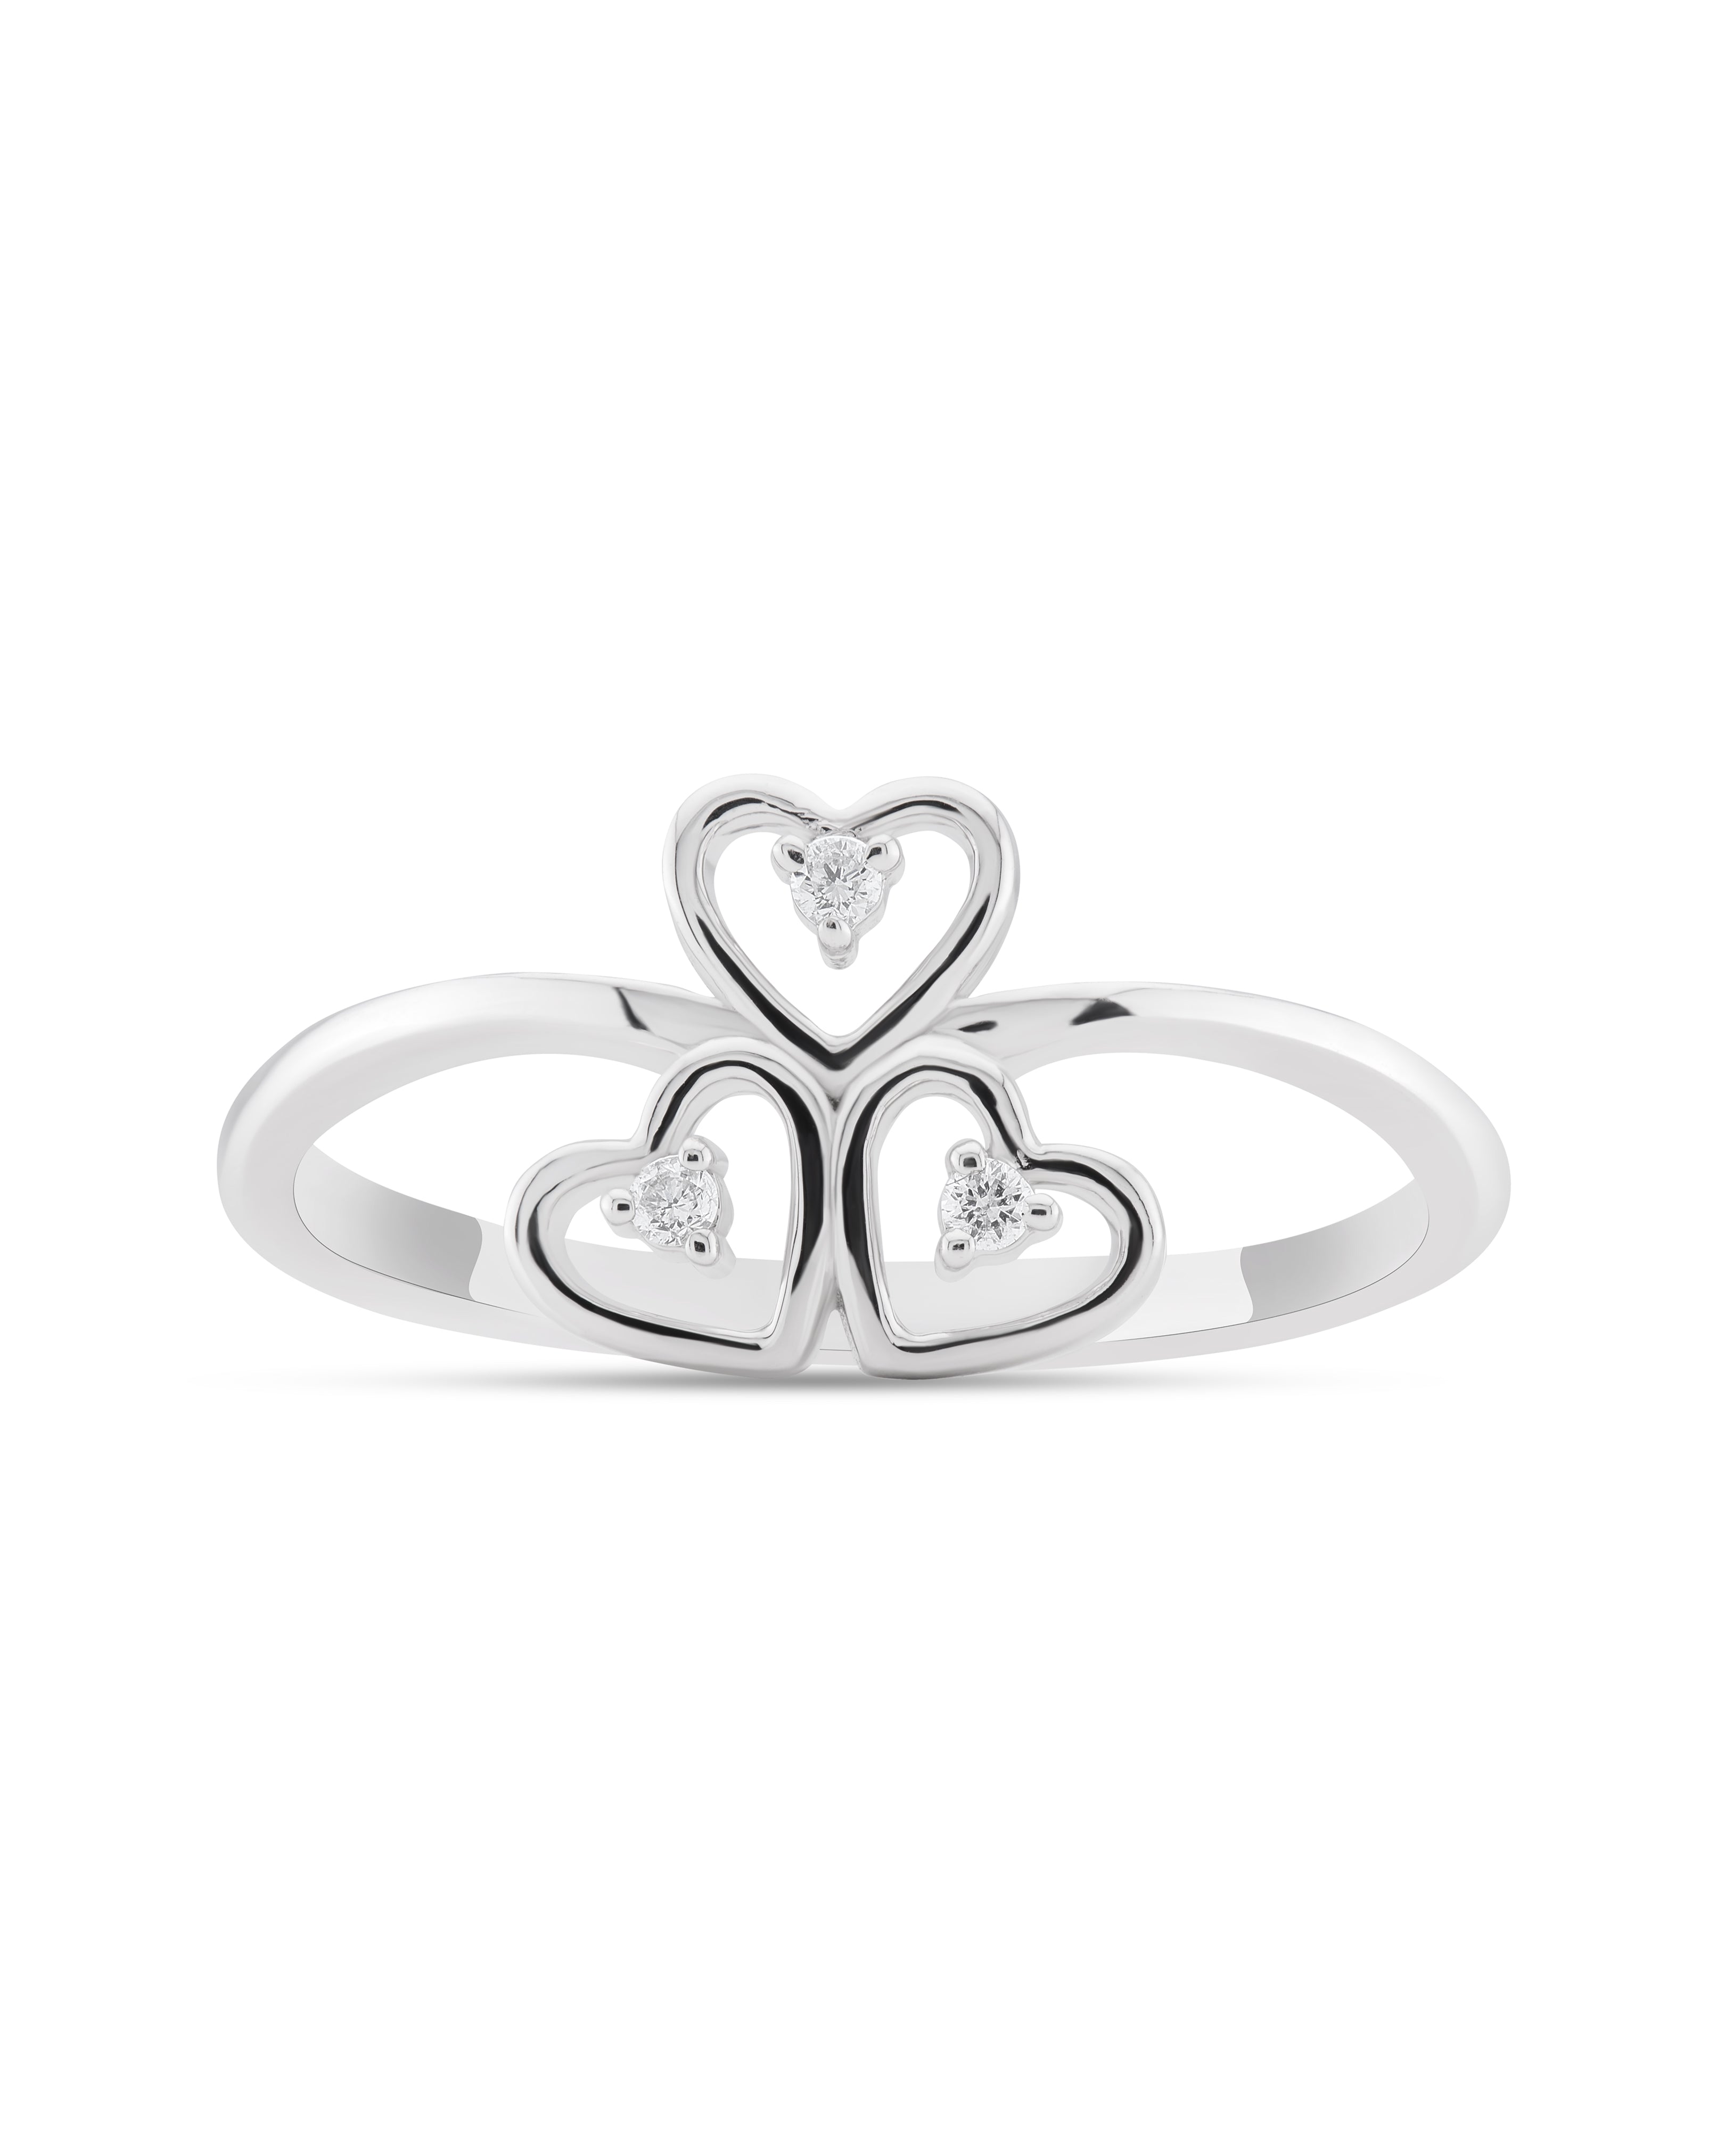 AMORE- Forever United Hearts Ring